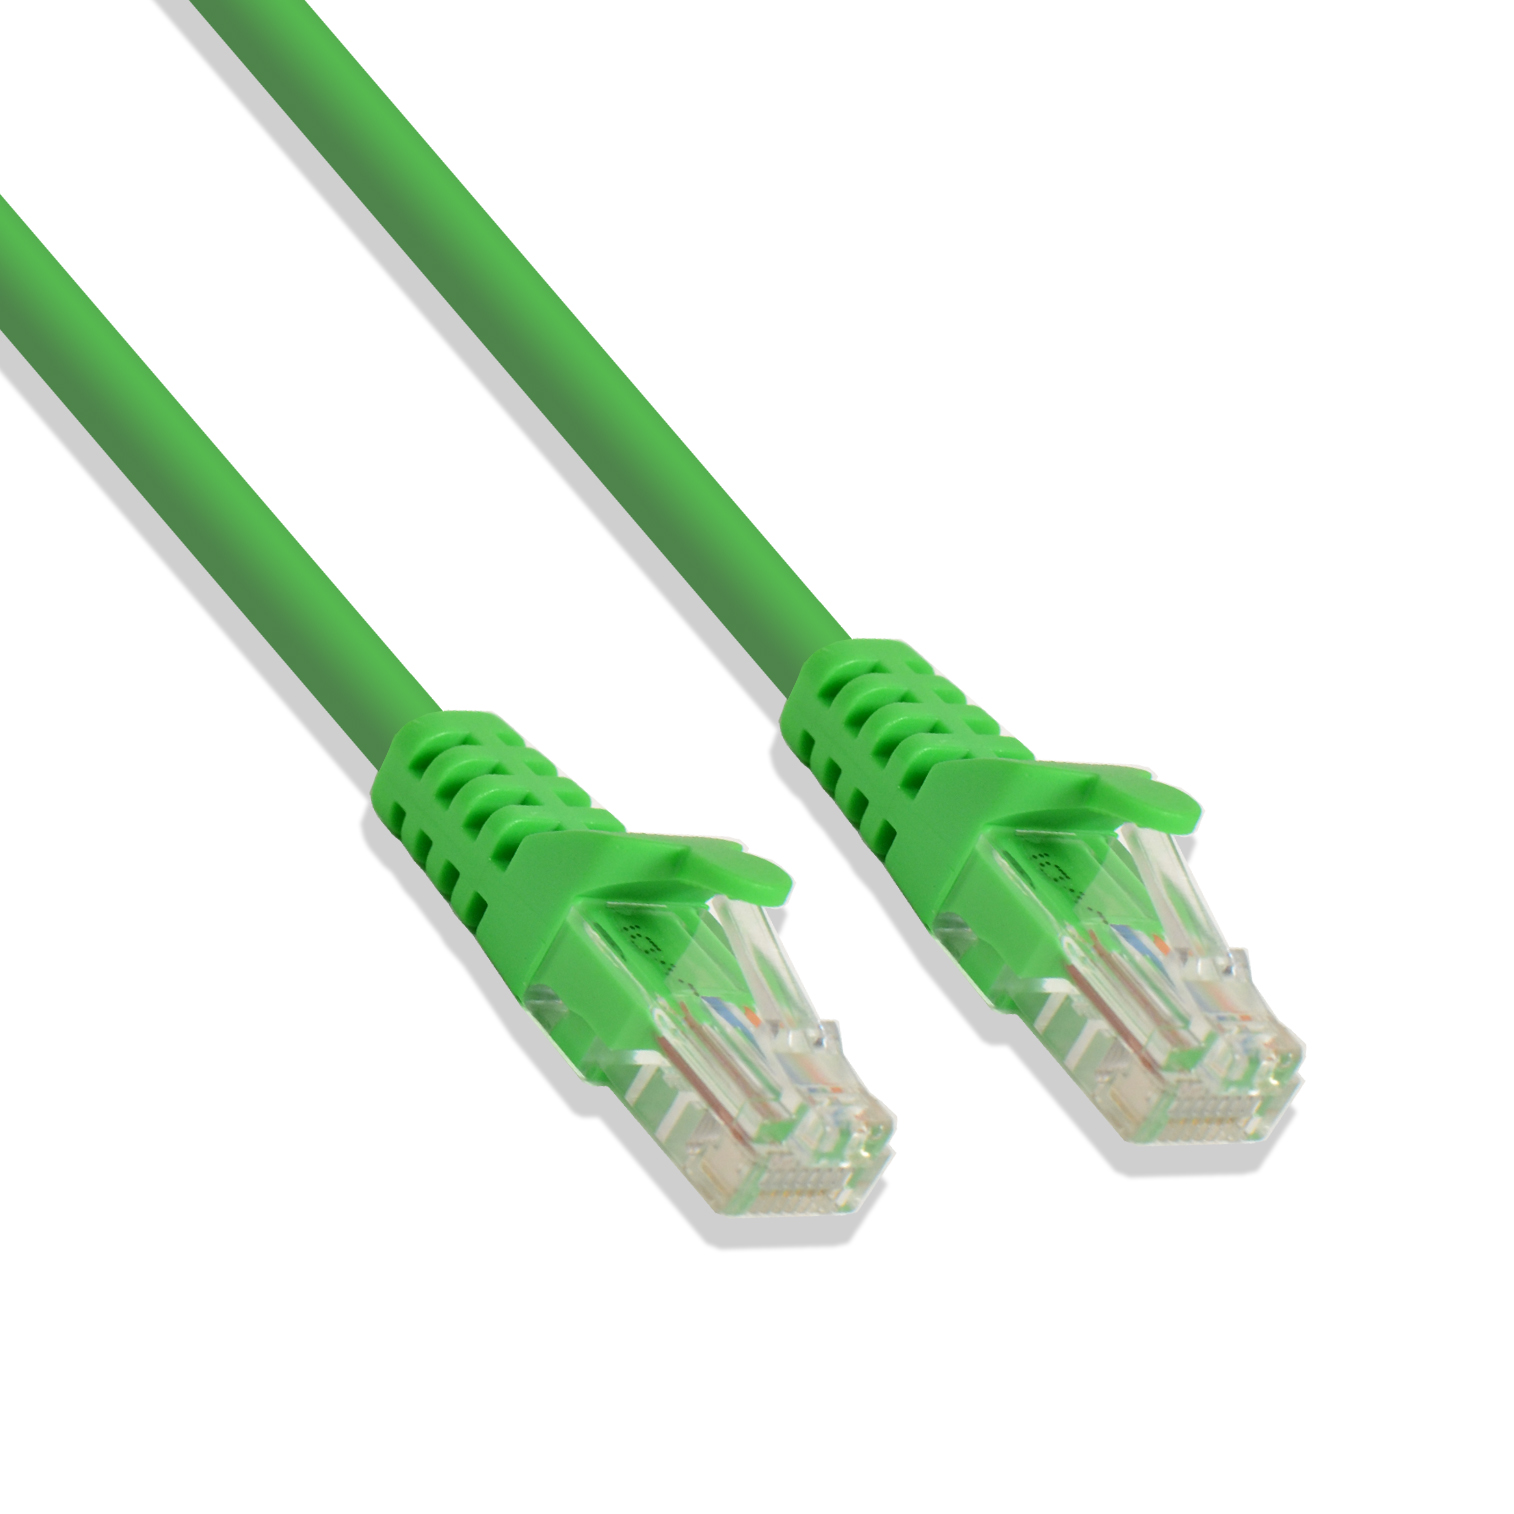 Cat5,UTP,24AWG,6ft,4 pair,8 wire//Bundles of 25,Ethernet Data Cables,RJ 45 ends